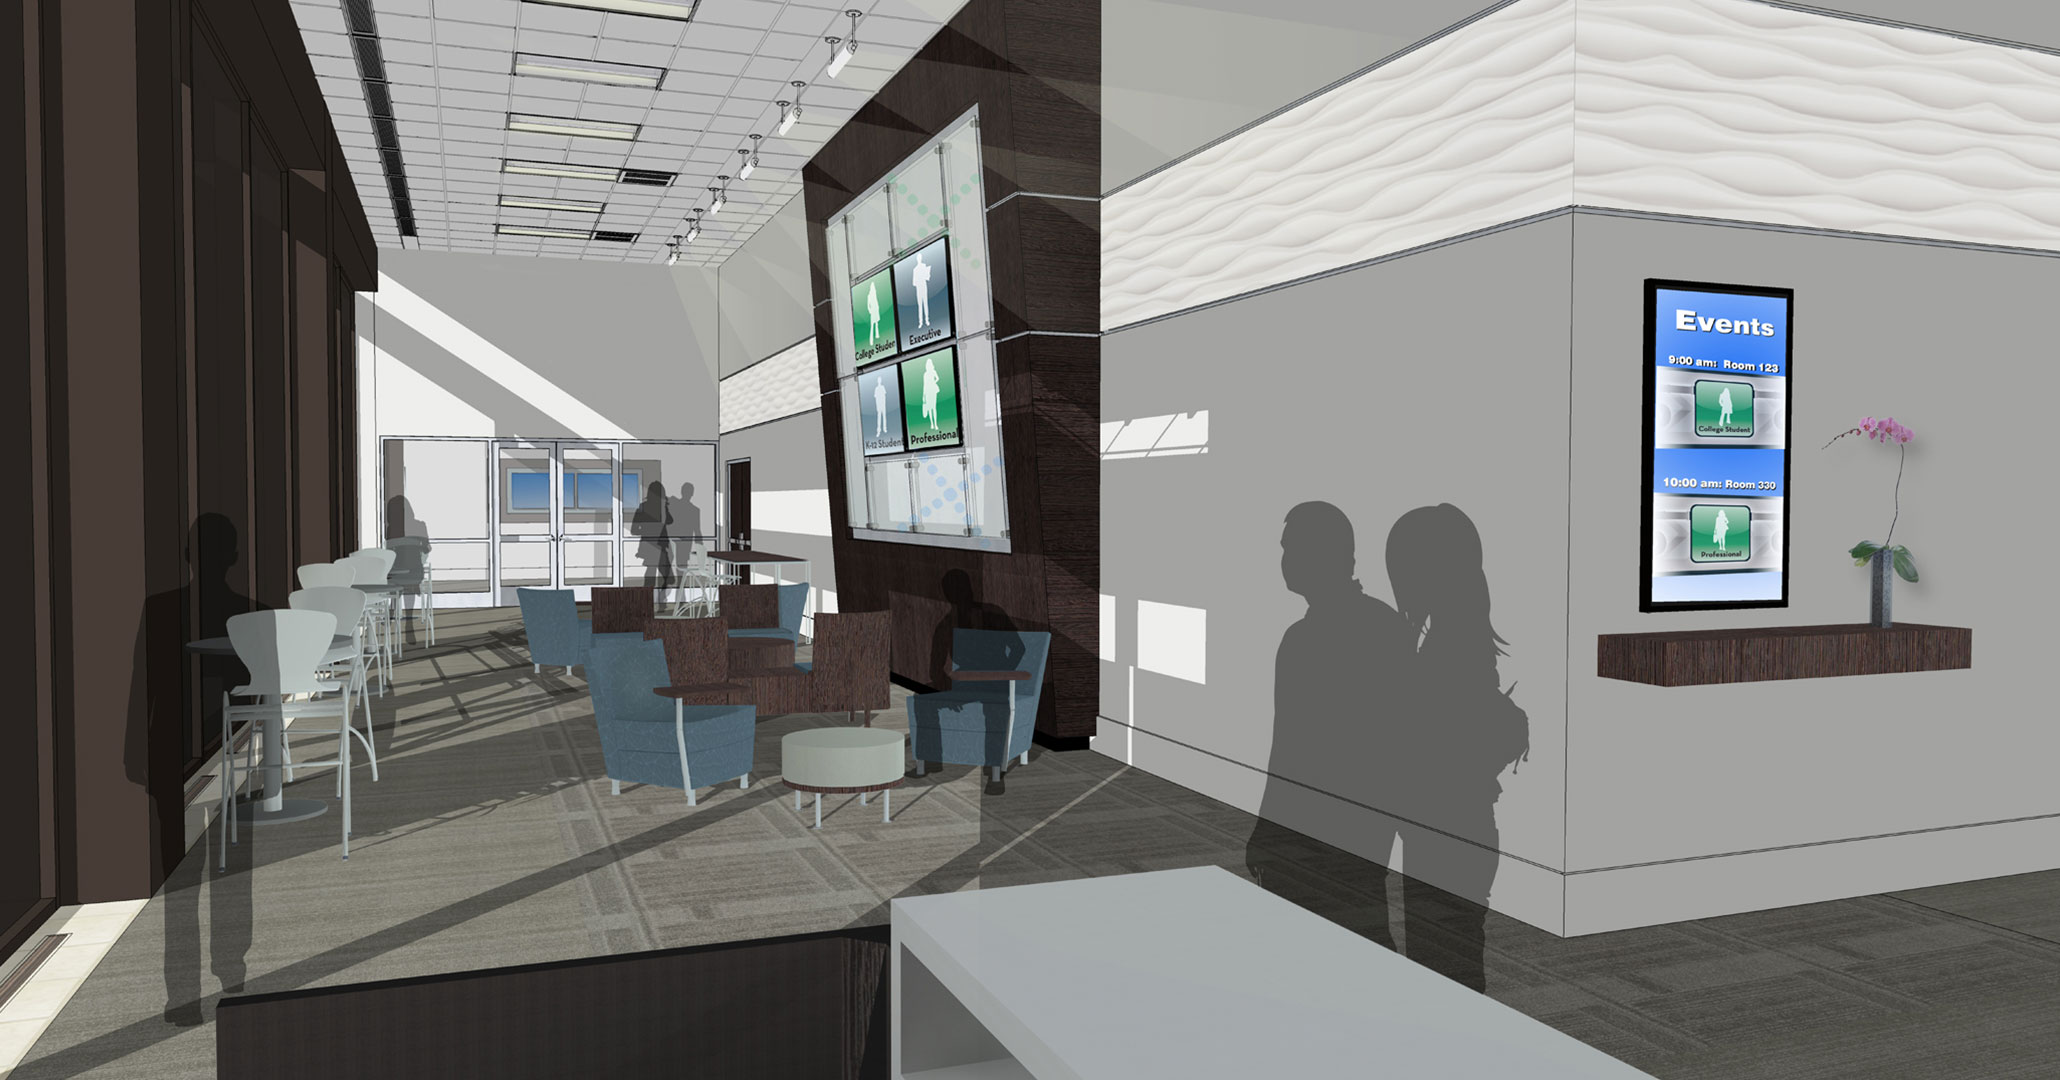 Boudreaux architects worked with the IT-ology to provide interior design and programming services for their new office space on Gervais Street, shown are renderings during the design phase.